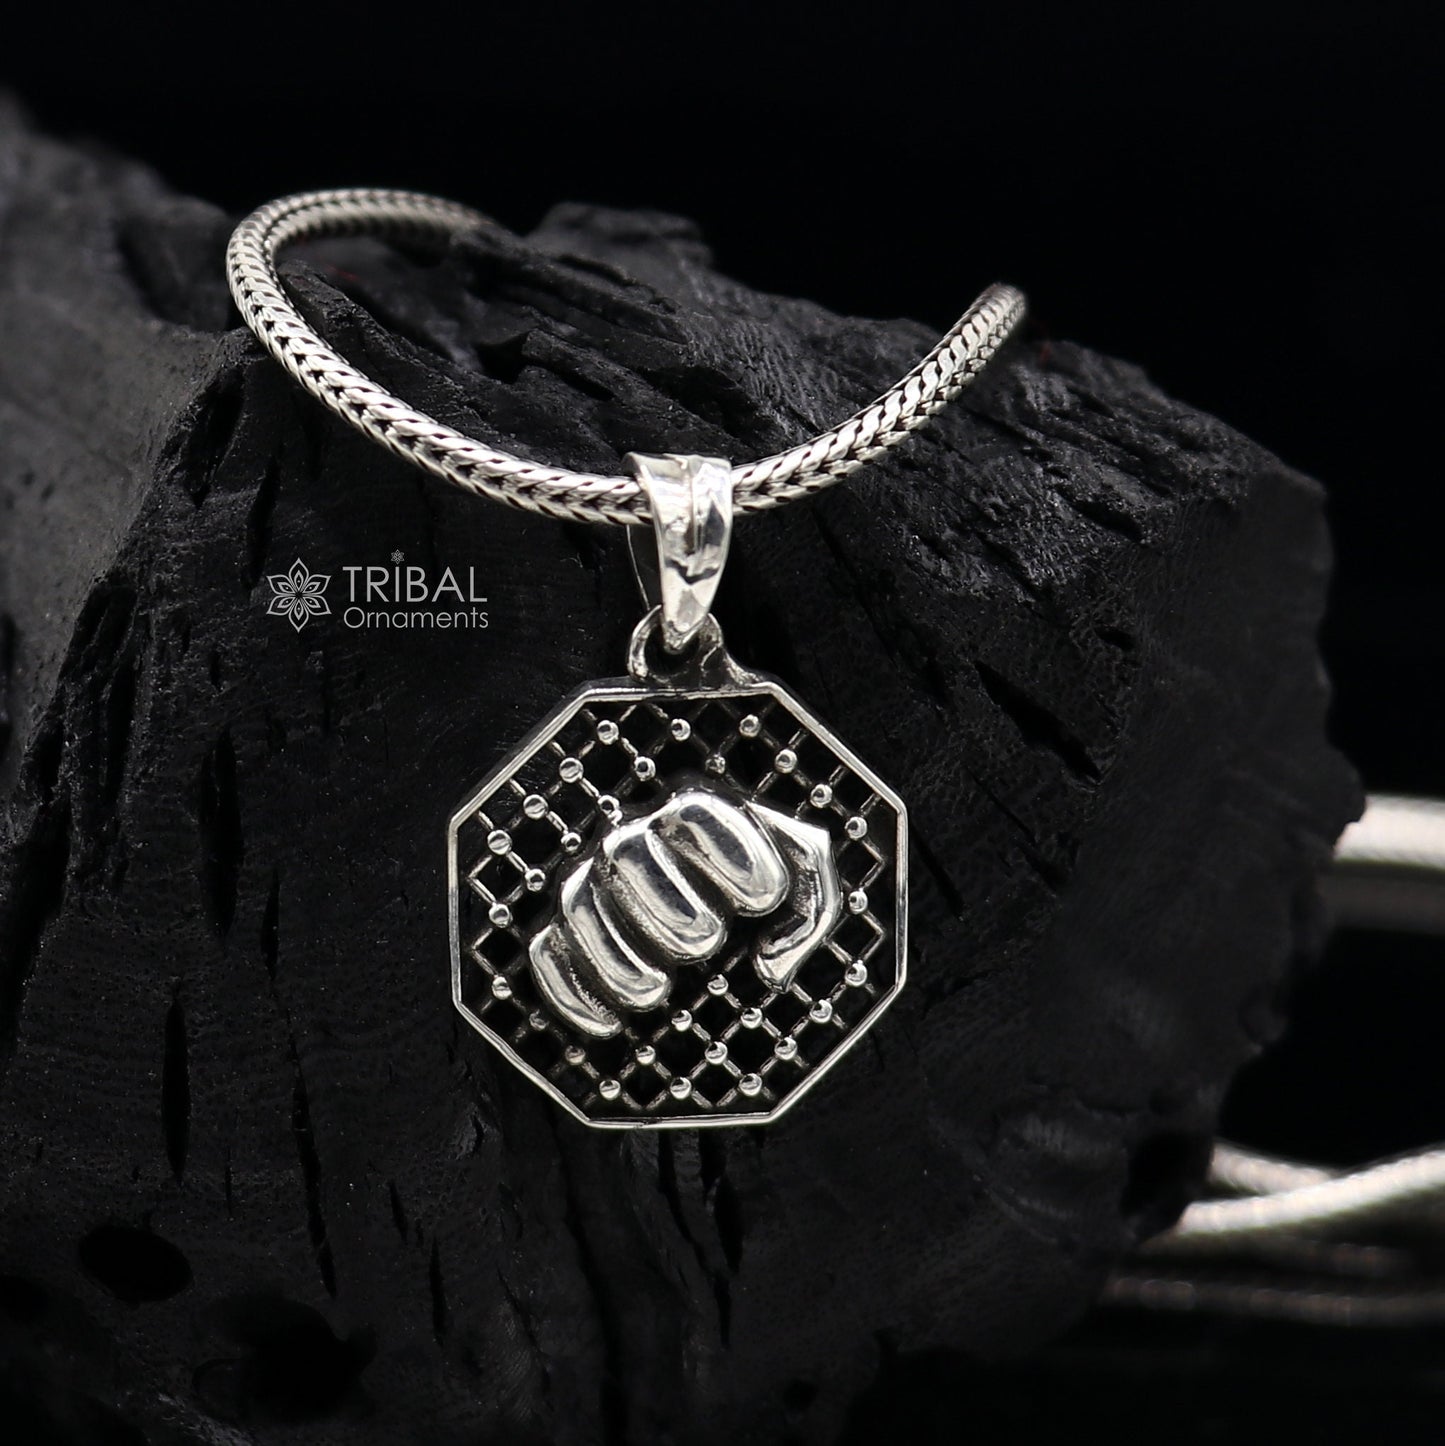 Amazing 925 sterling silver handmade wrist punch design pendant, high quality silver small pendant for zym or gym boy girls nsp670 - TRIBAL ORNAMENTS